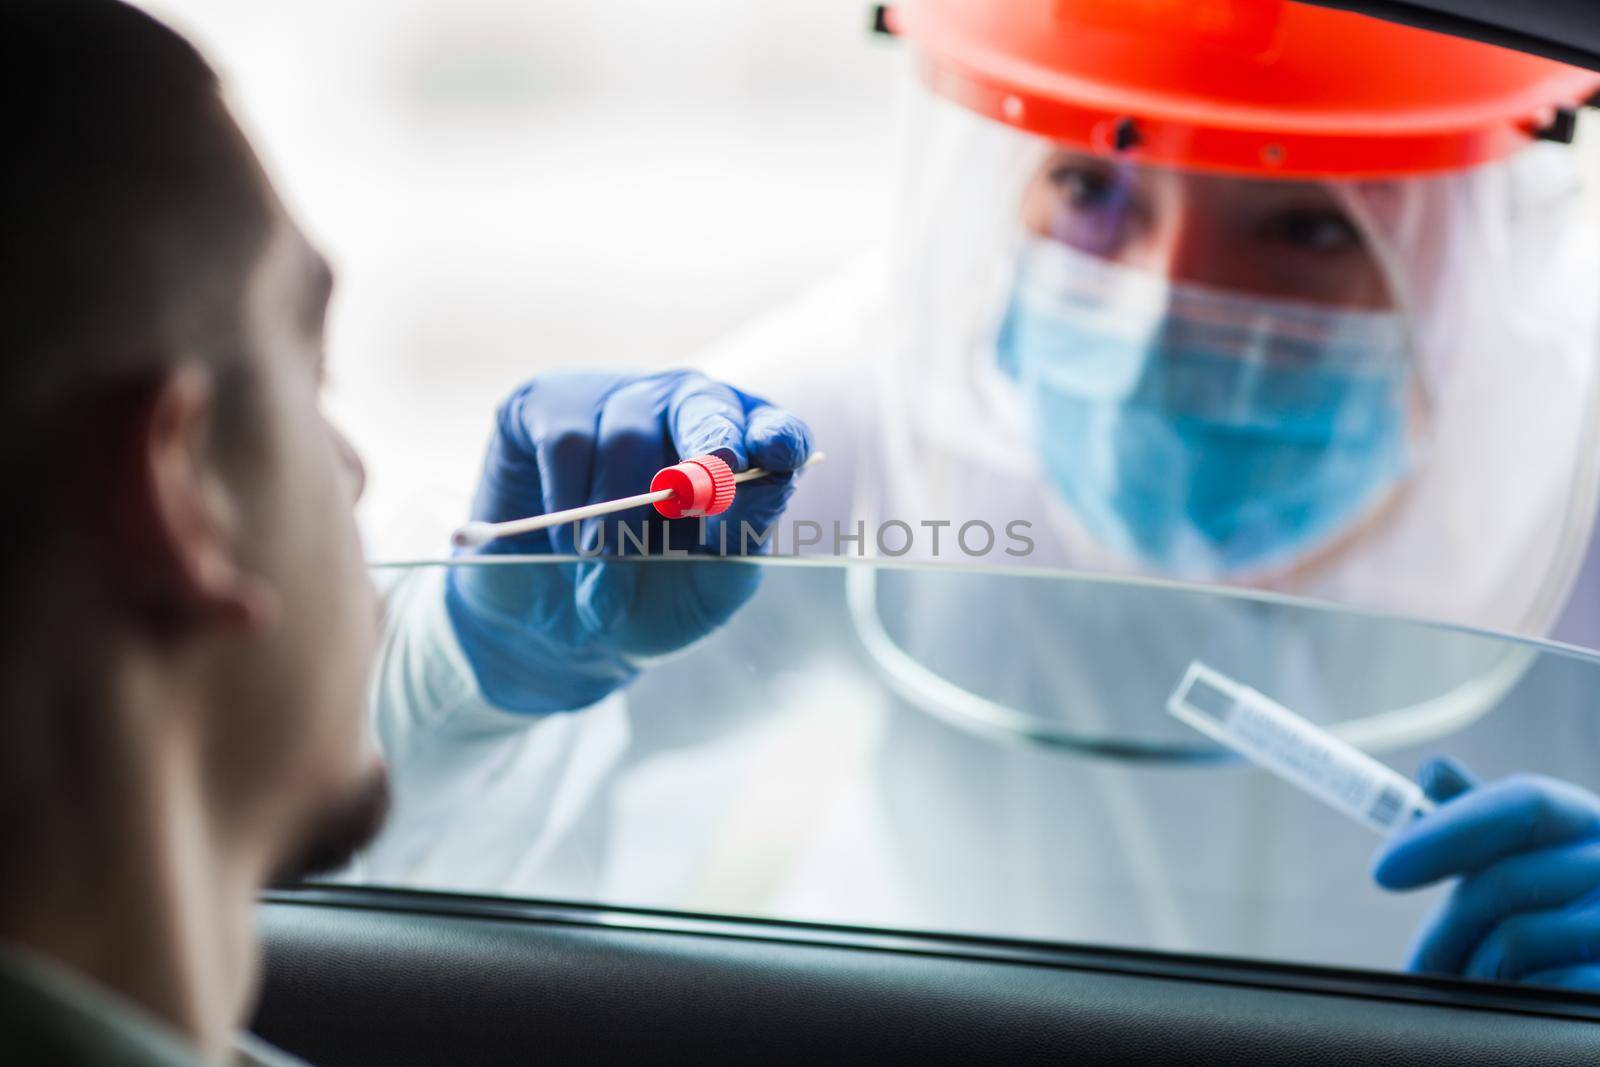 COVID-19 drive-thru patient specimen collection,female medical worker performing nasal swab on young man through vehicle window,Coronavirus point of care rt-PCR diagnostic at testing site location